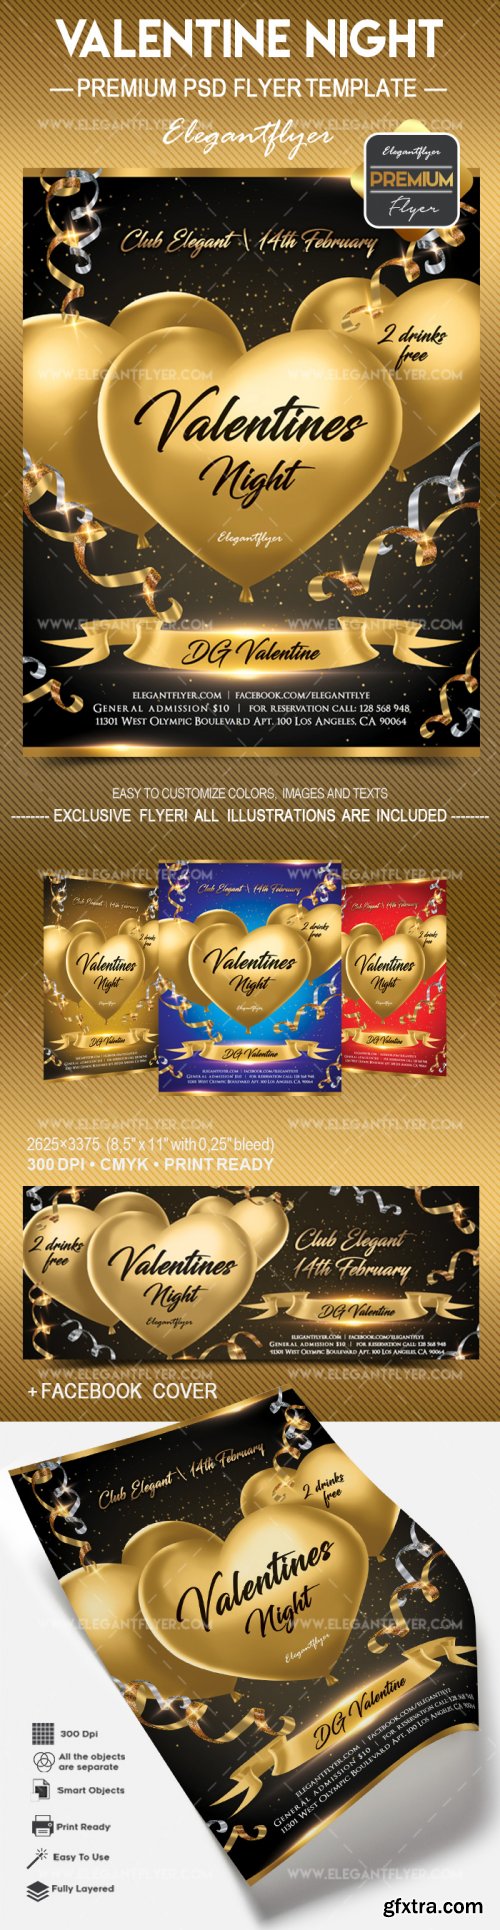 Valentines Night V26 2018 Flyer PSD Template + Facebook Cover